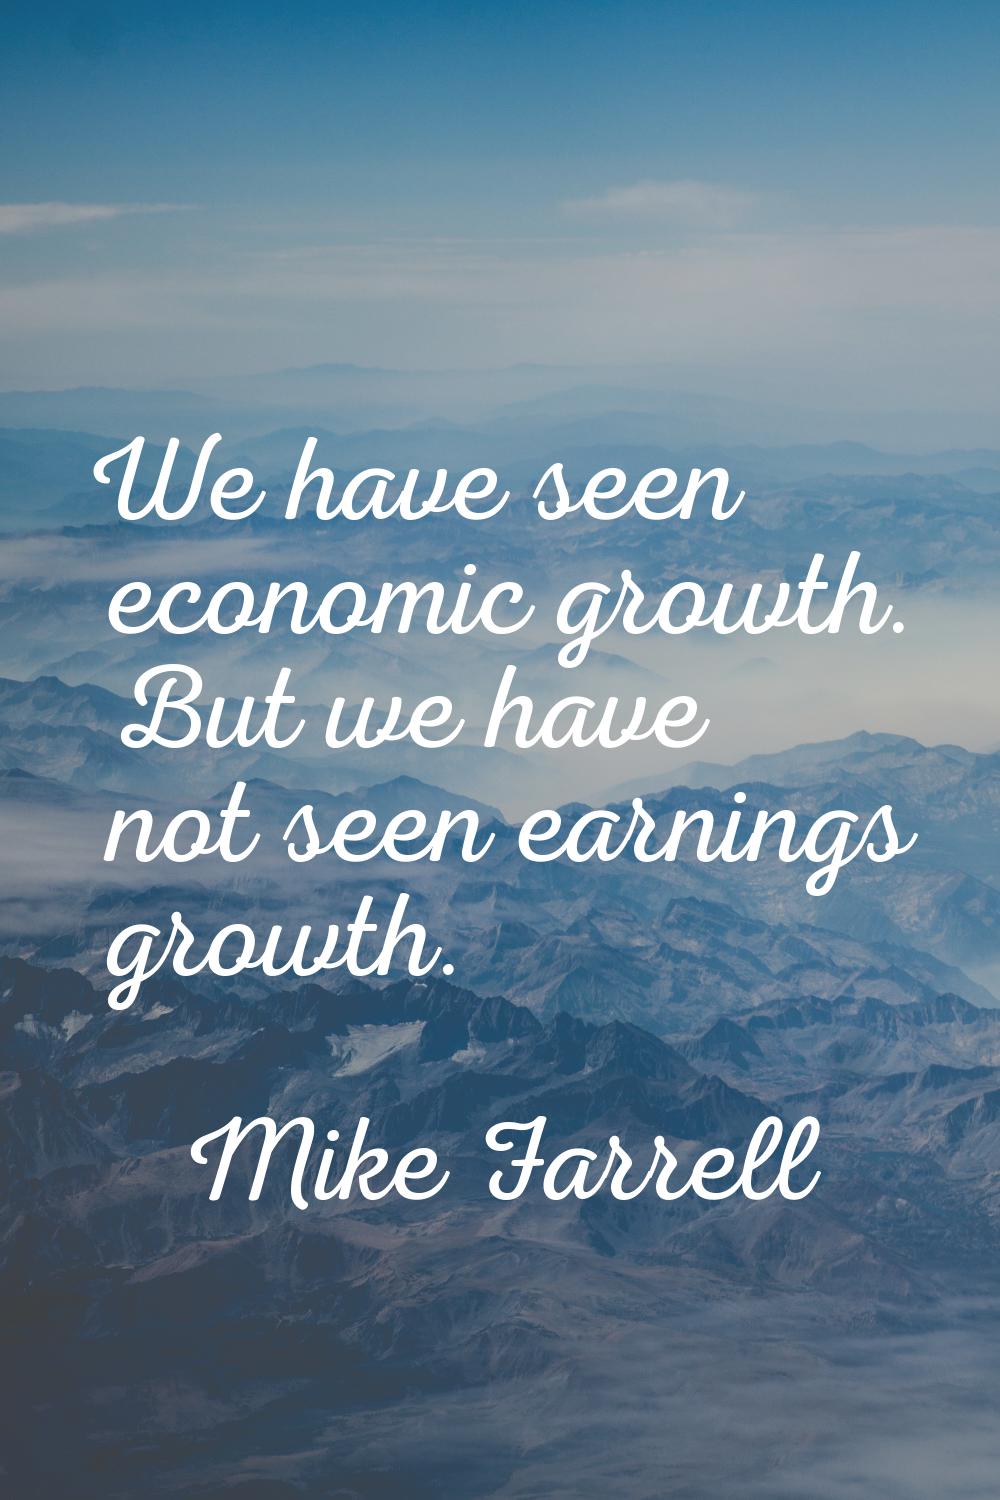 We have seen economic growth. But we have not seen earnings growth.